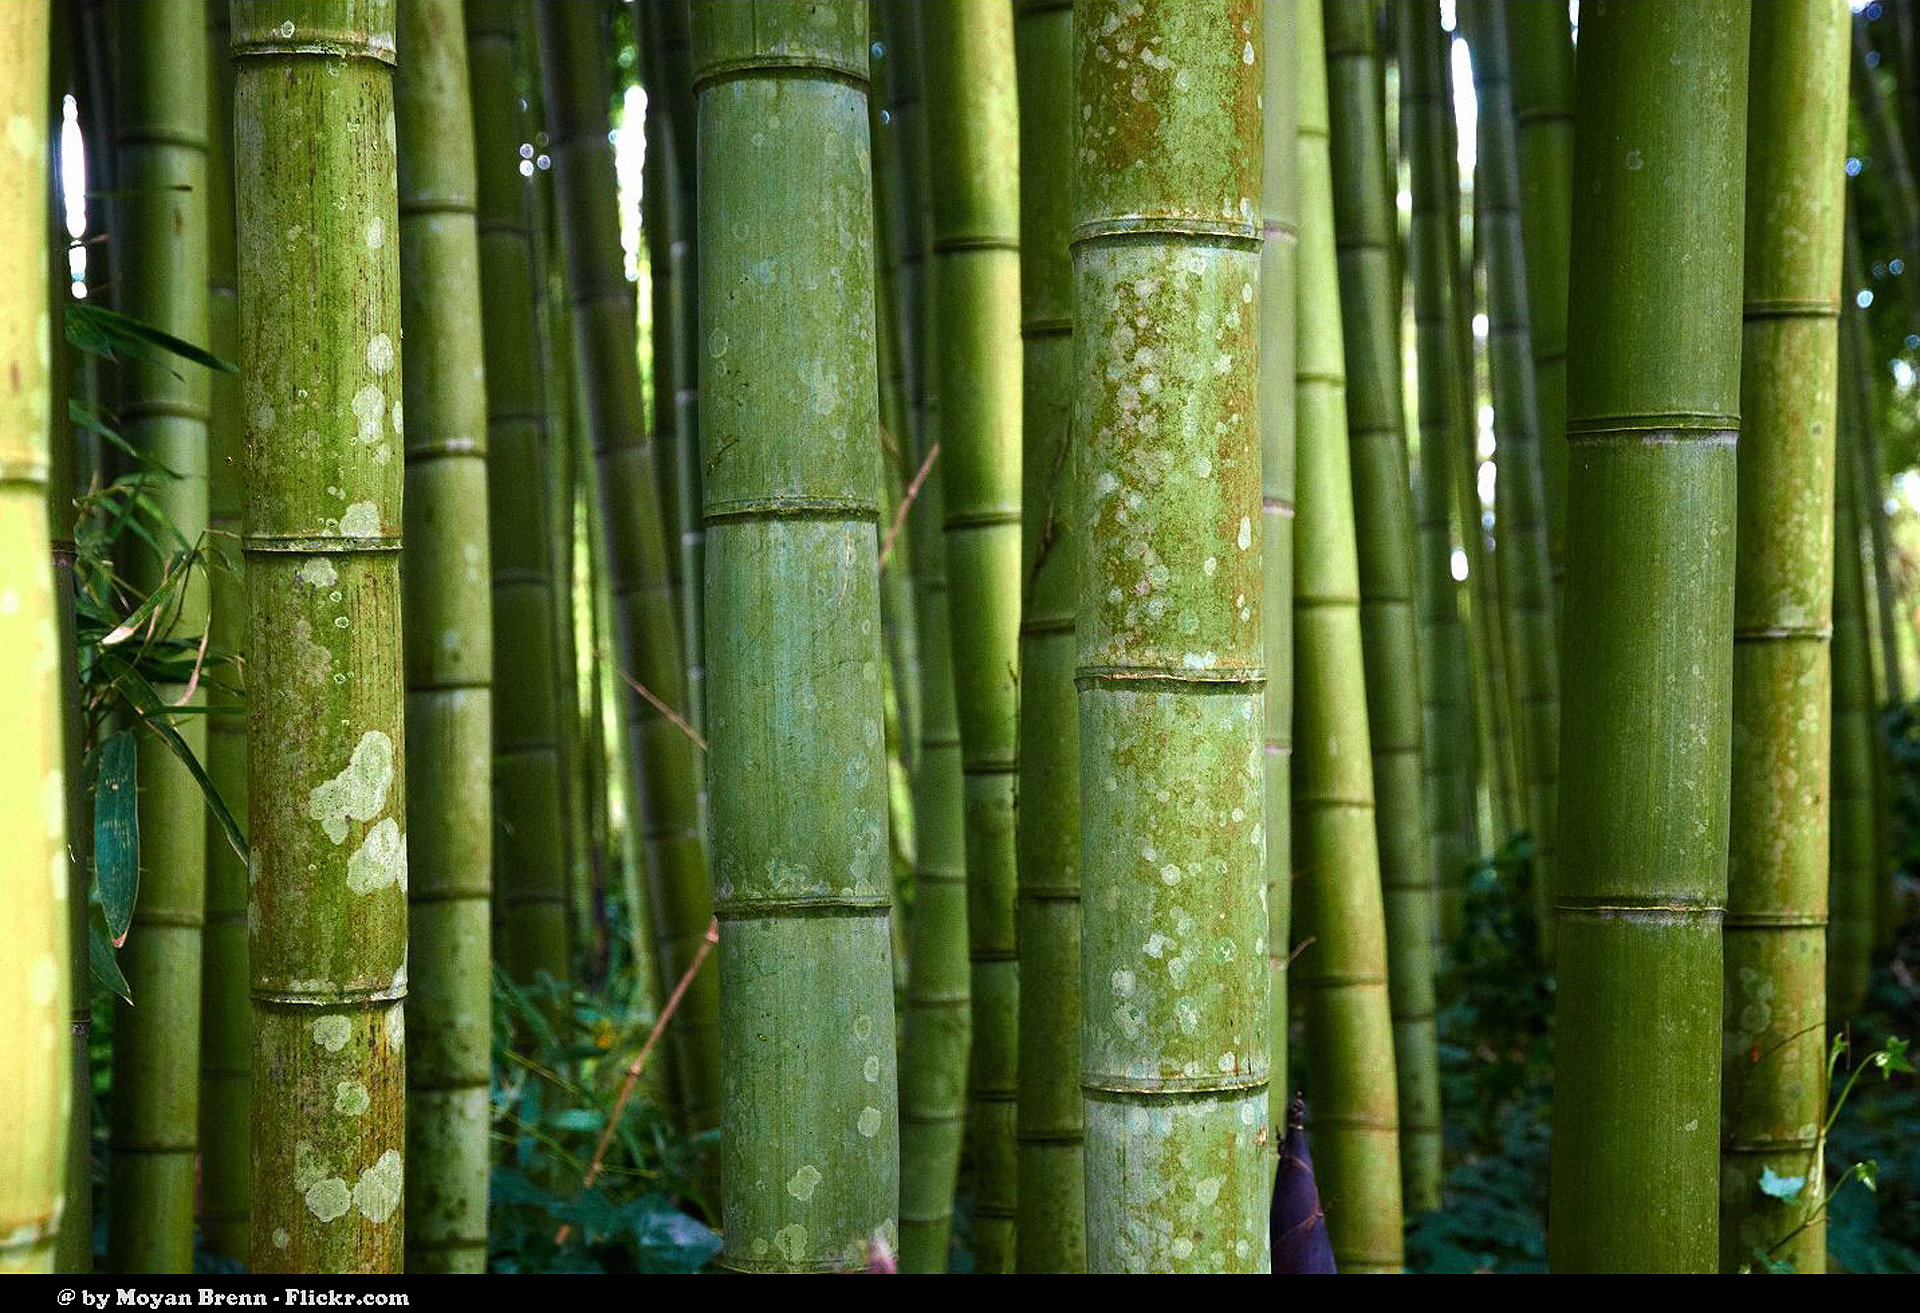 Bamboo: The Miracle Plant